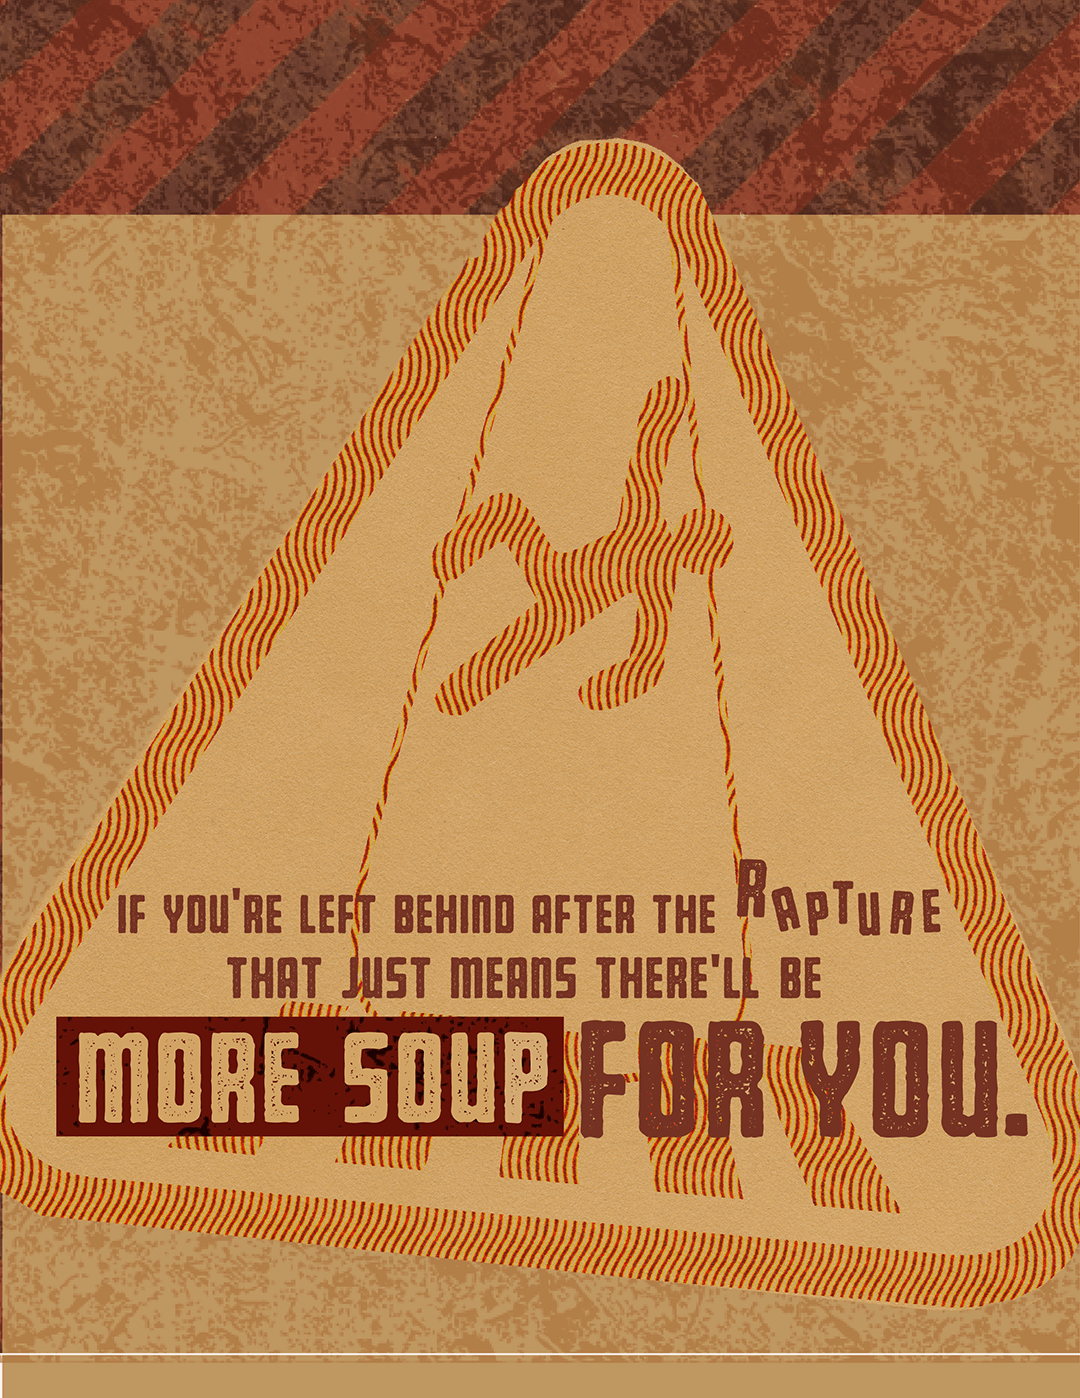 If you’re left behind after the rapture, that just means there’ll be more soup for you.